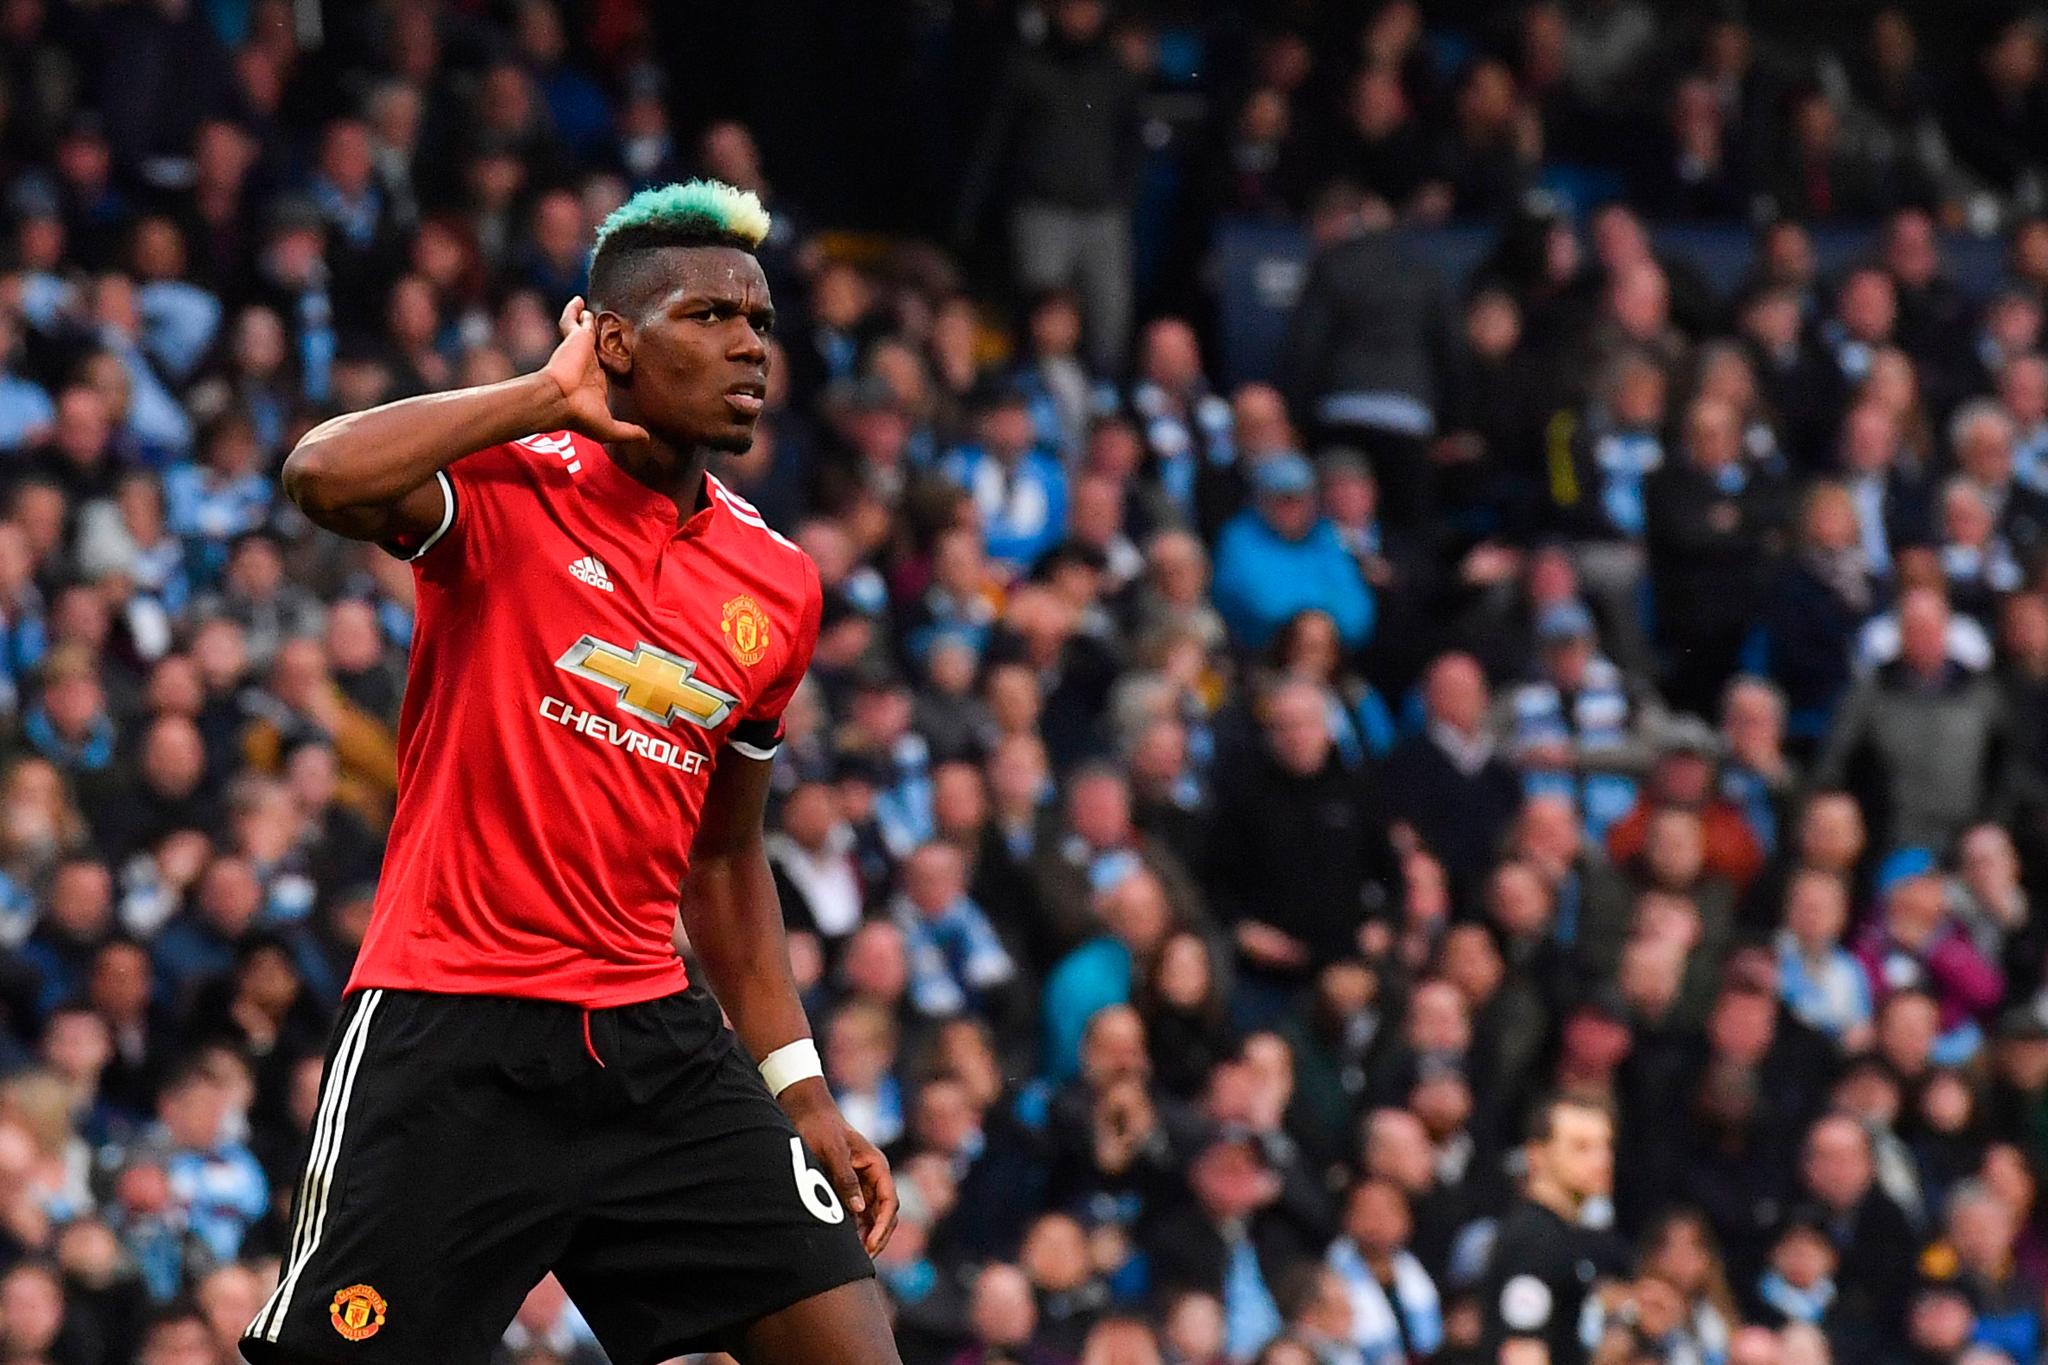 Pogba needs to deliver consistently – Neville